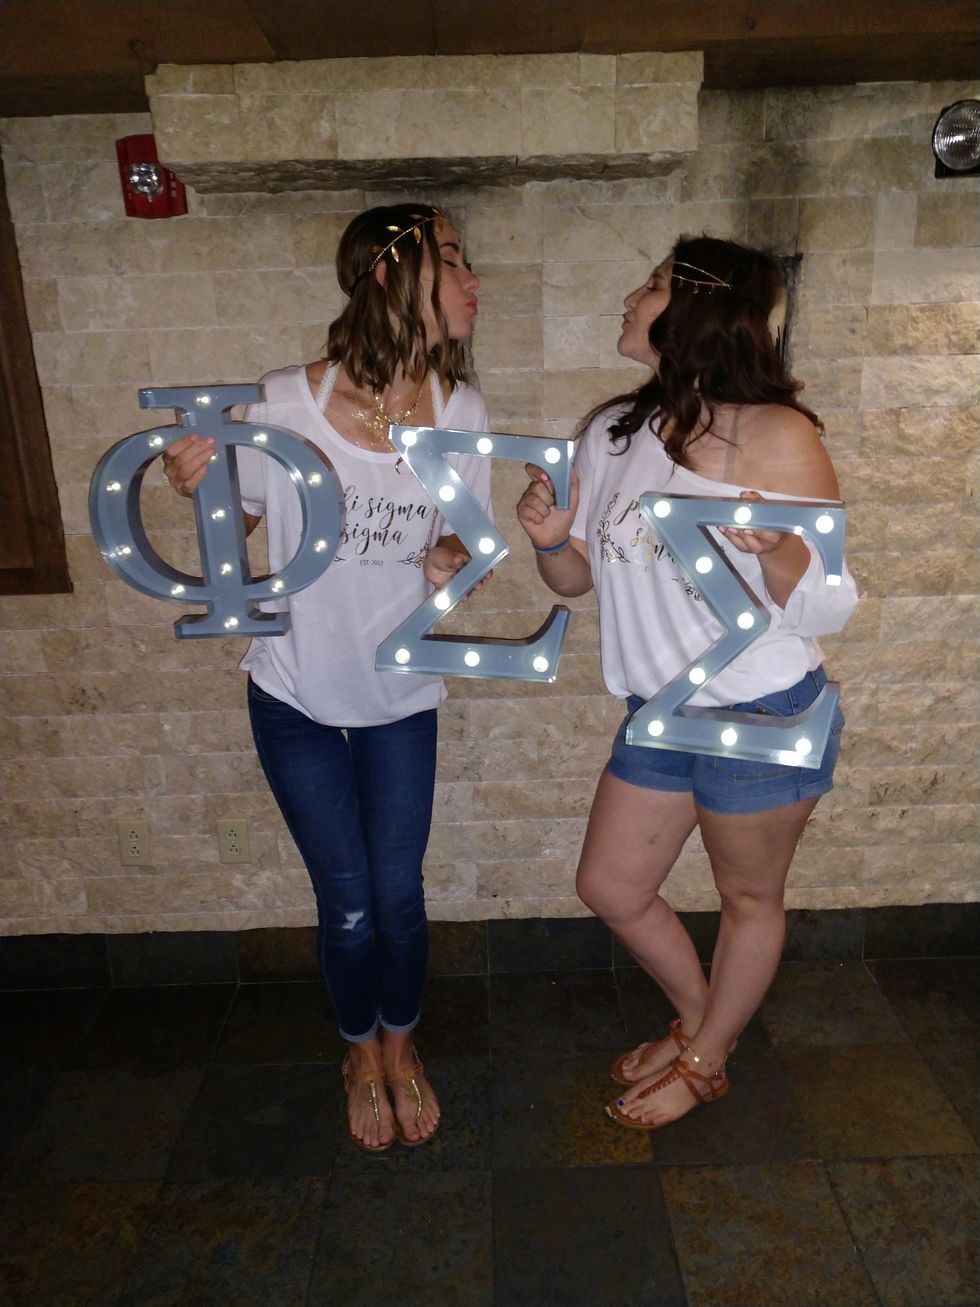 10 Signs You're In A Sorority